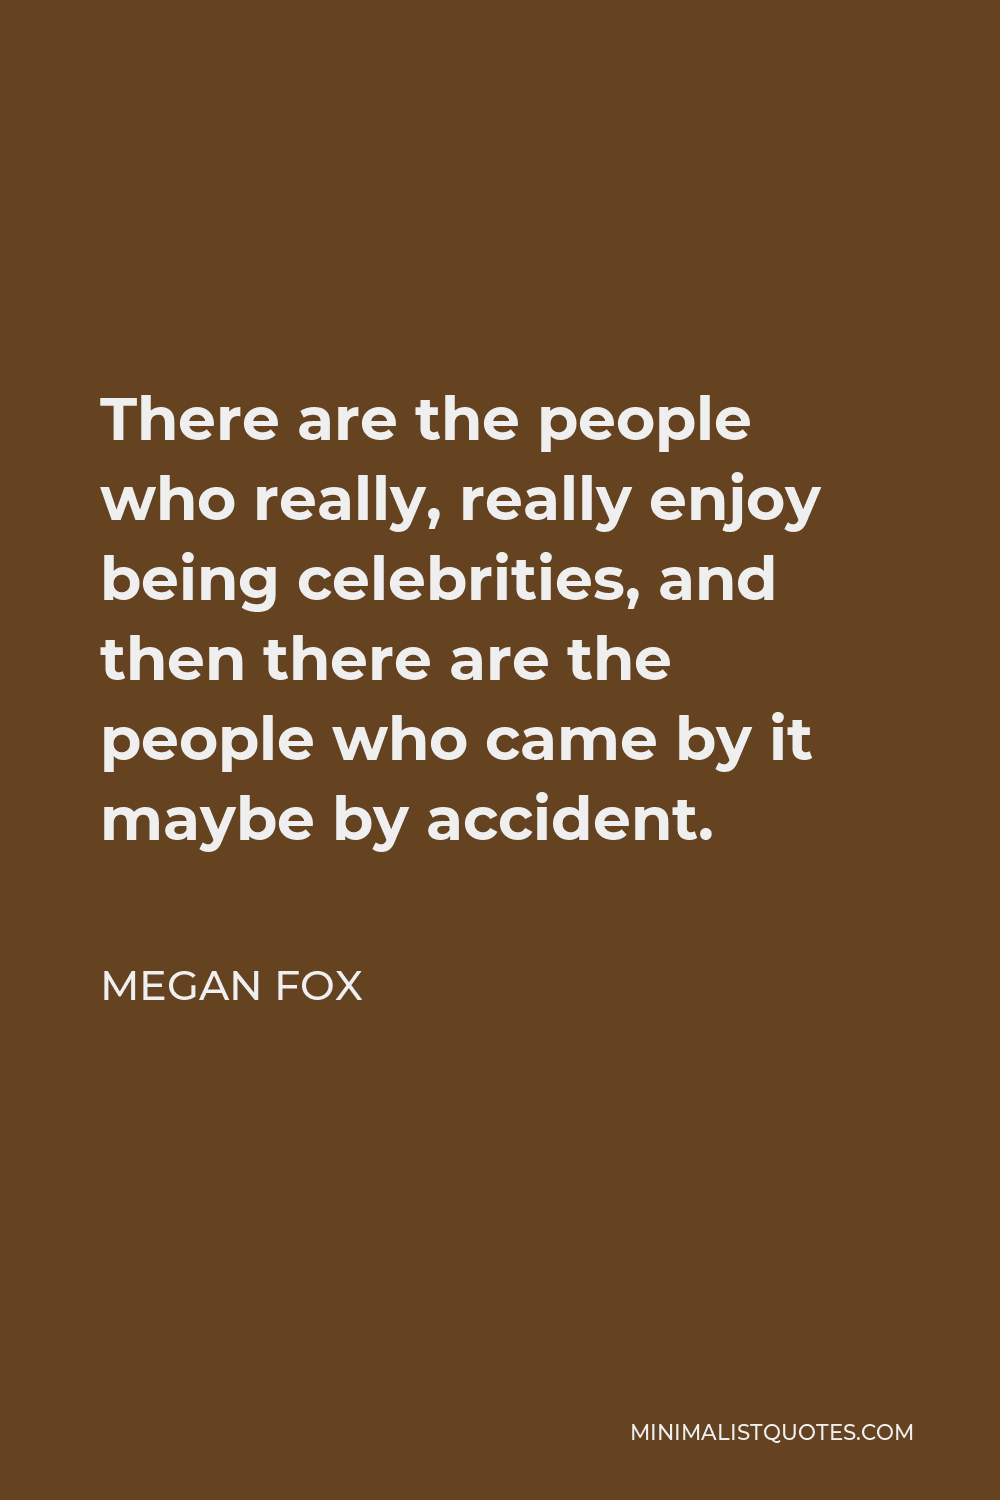 Megan Fox Quote - There are the people who really, really enjoy being celebrities, and then there are the people who came by it maybe by accident.